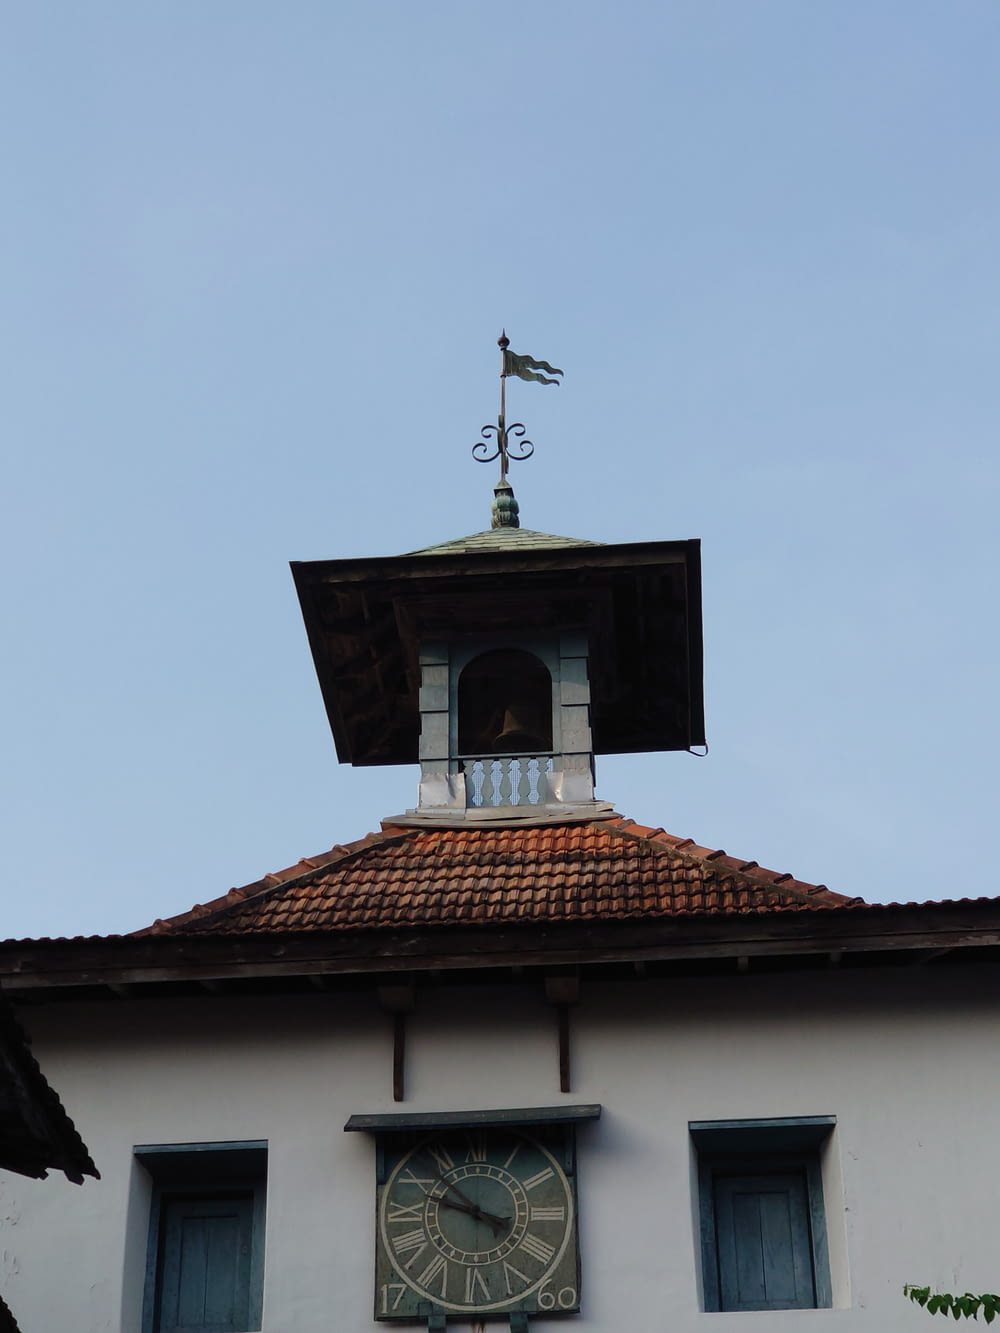 a clock tower with a weather vane on top of it